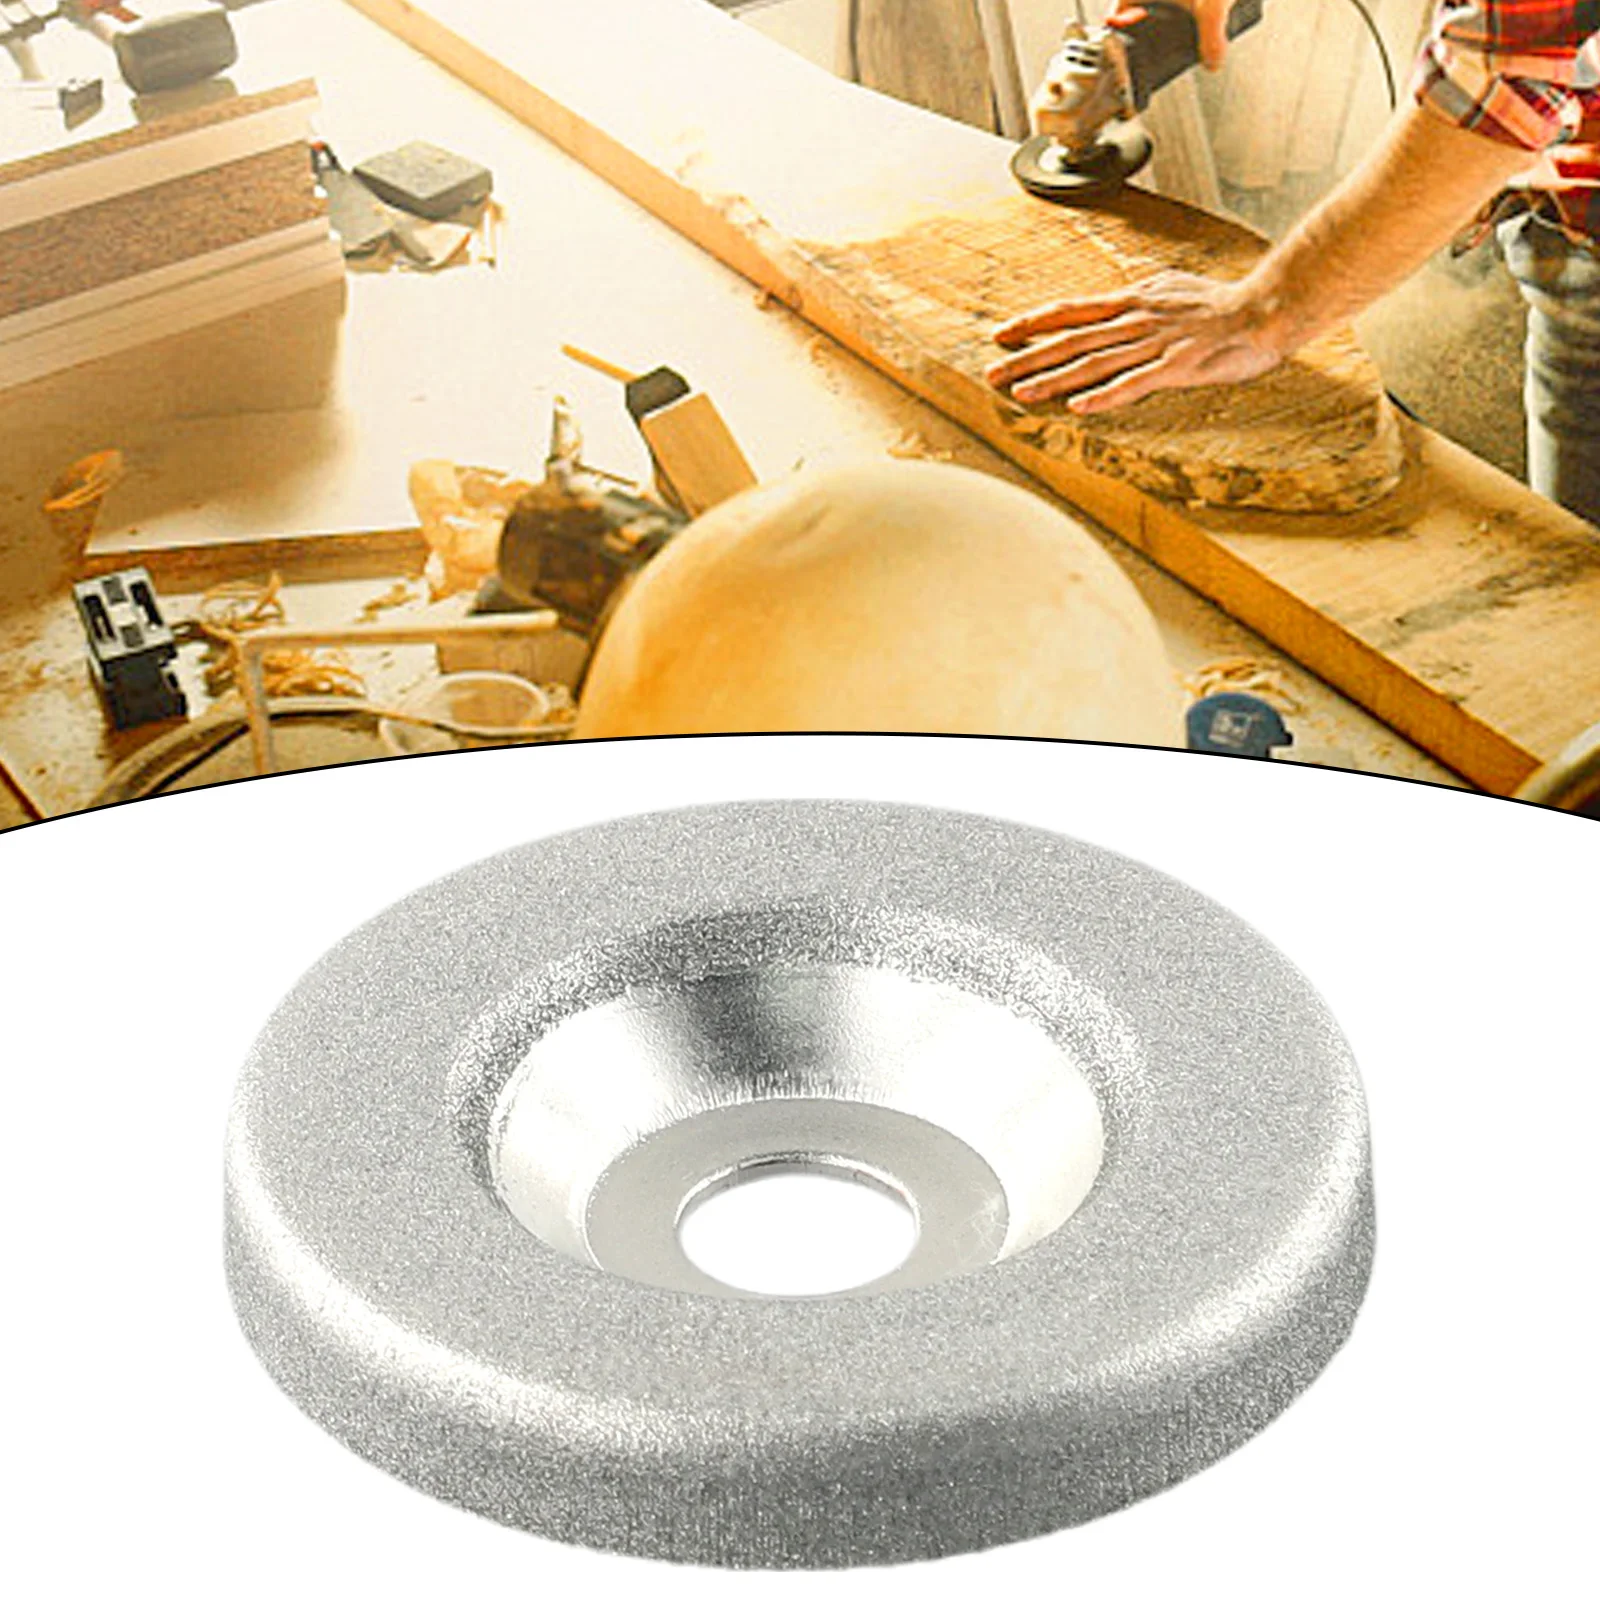 

1pc Diamond Grinding Wheel 50mm Sanding Discs 180 Grit Electric Grinder Sharpener Trimming Rotary Tool For Woodworking Industry